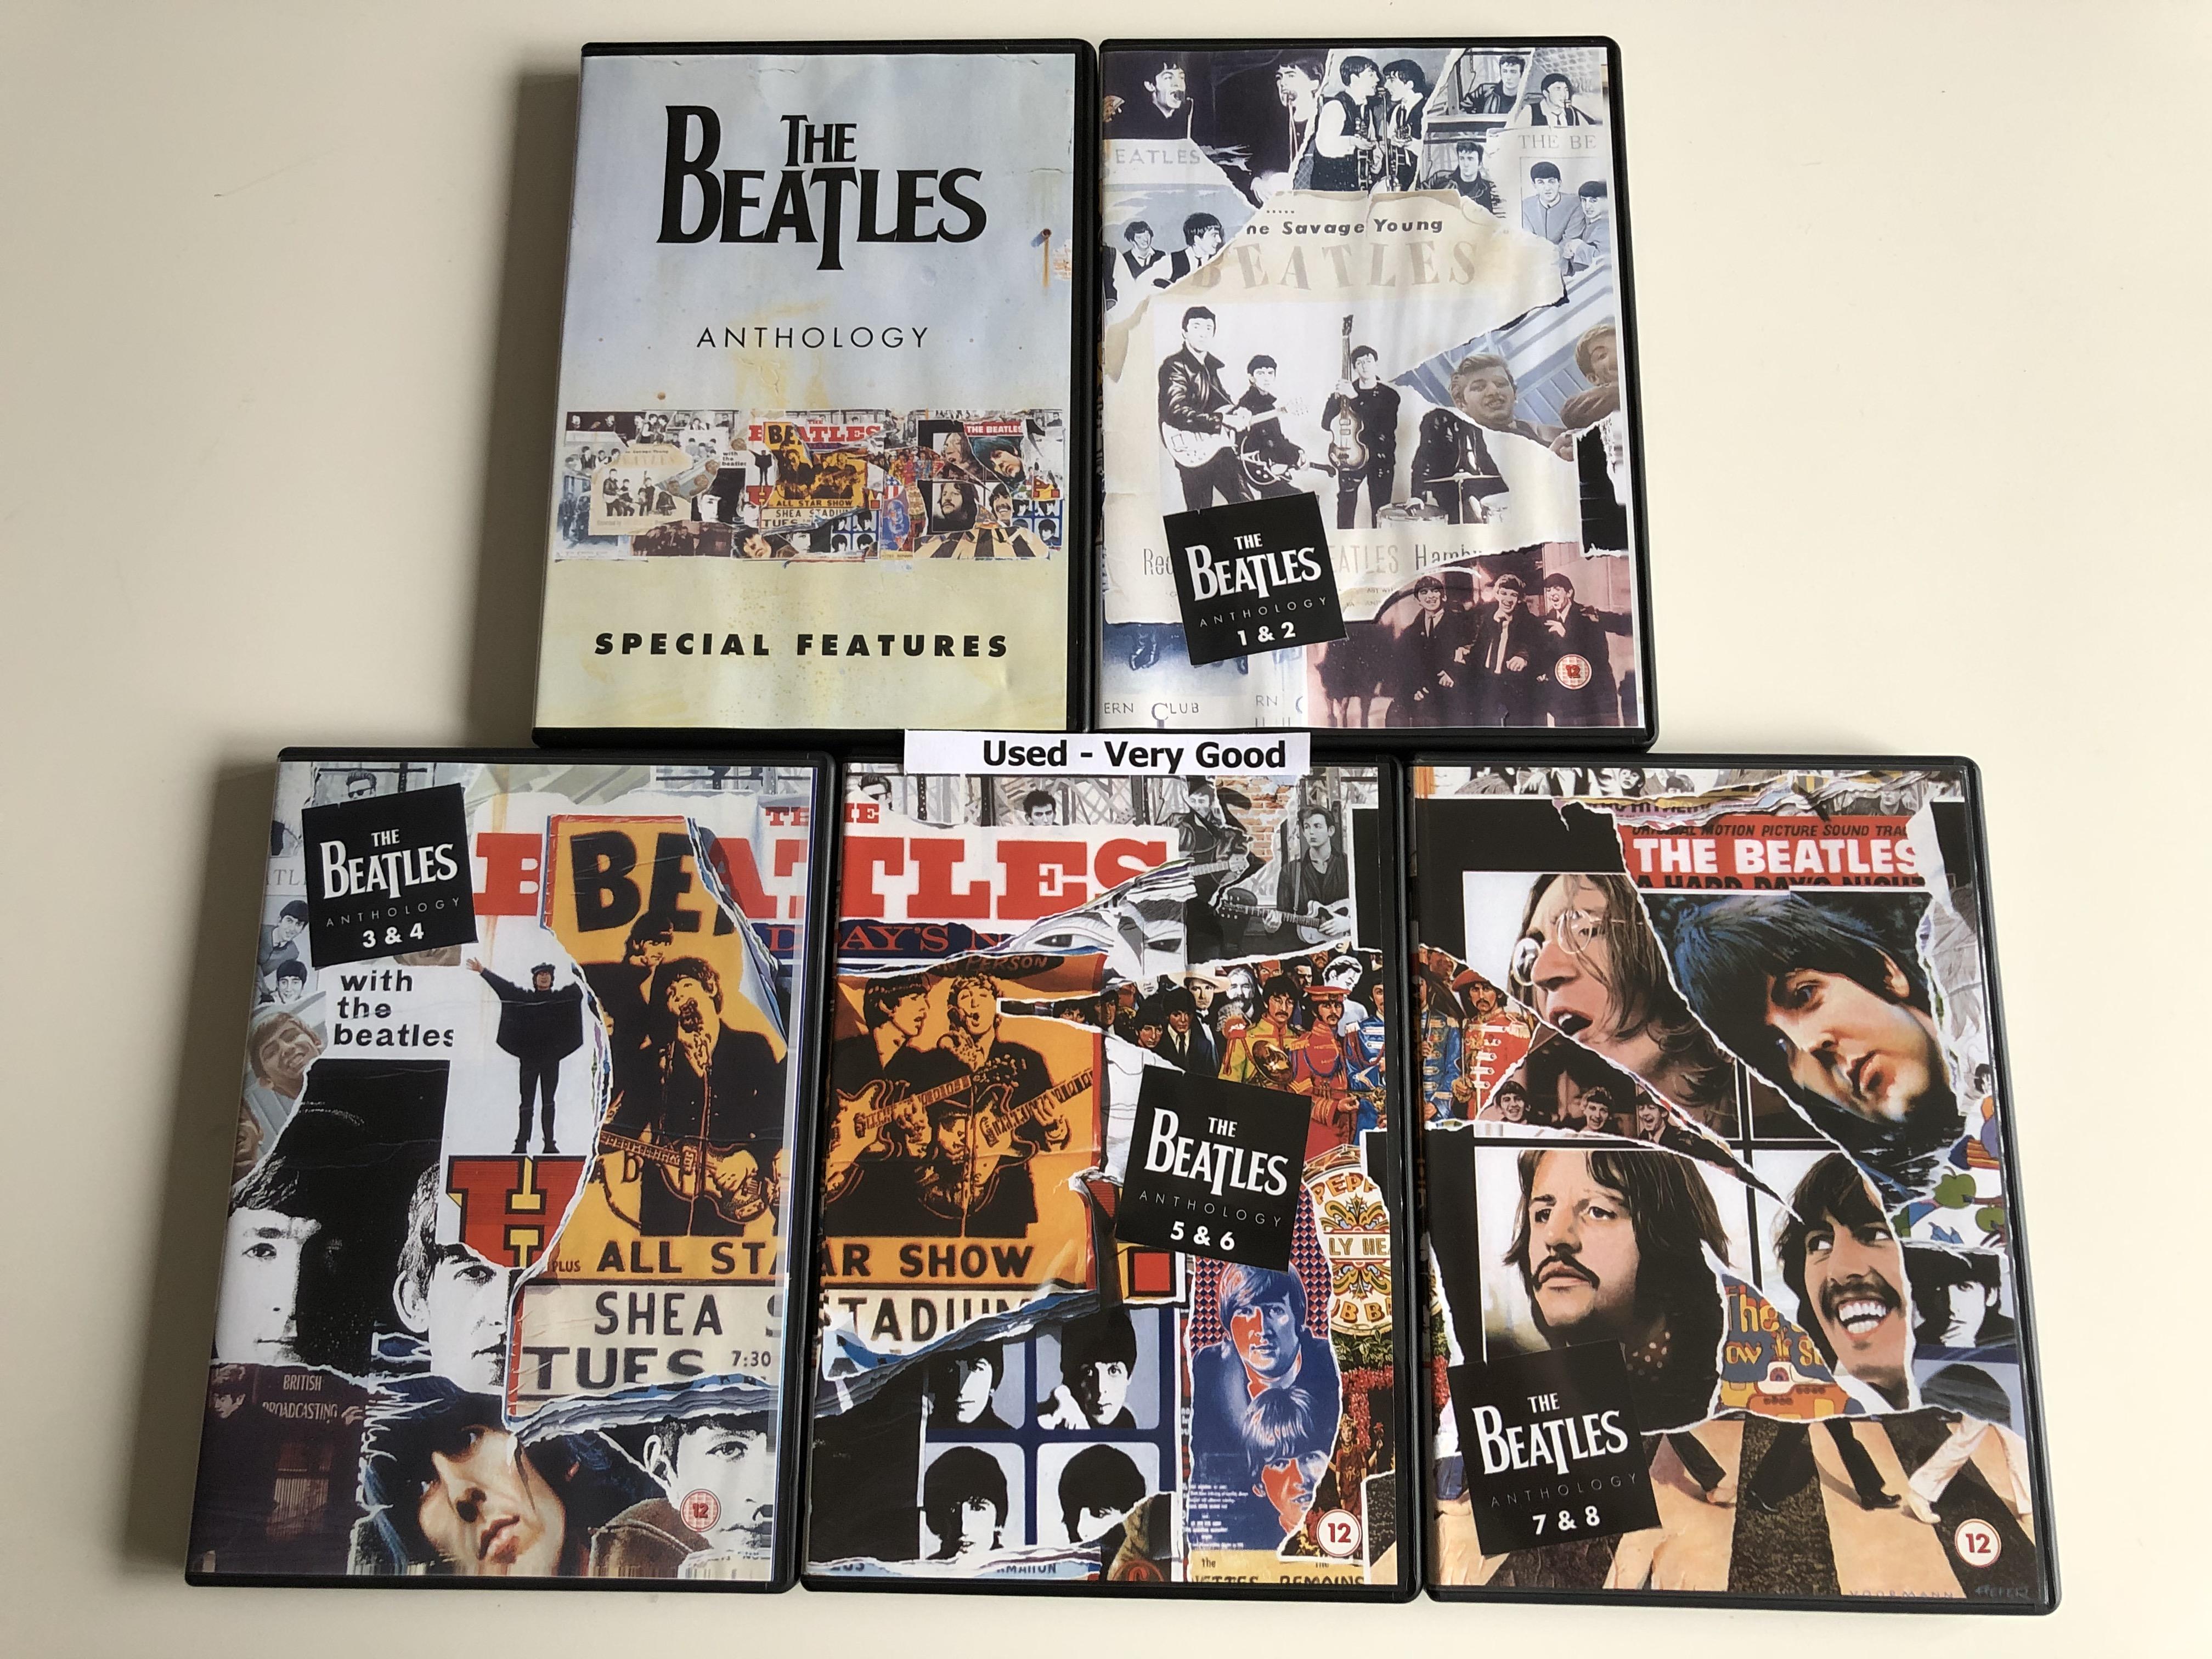 The Beatles Anthology DVD Set 2003 / 5 discs / 8 episodes documentary  series / Directed by Geoff Wonfor / Apple Records / Bonus: Special Features  DVD